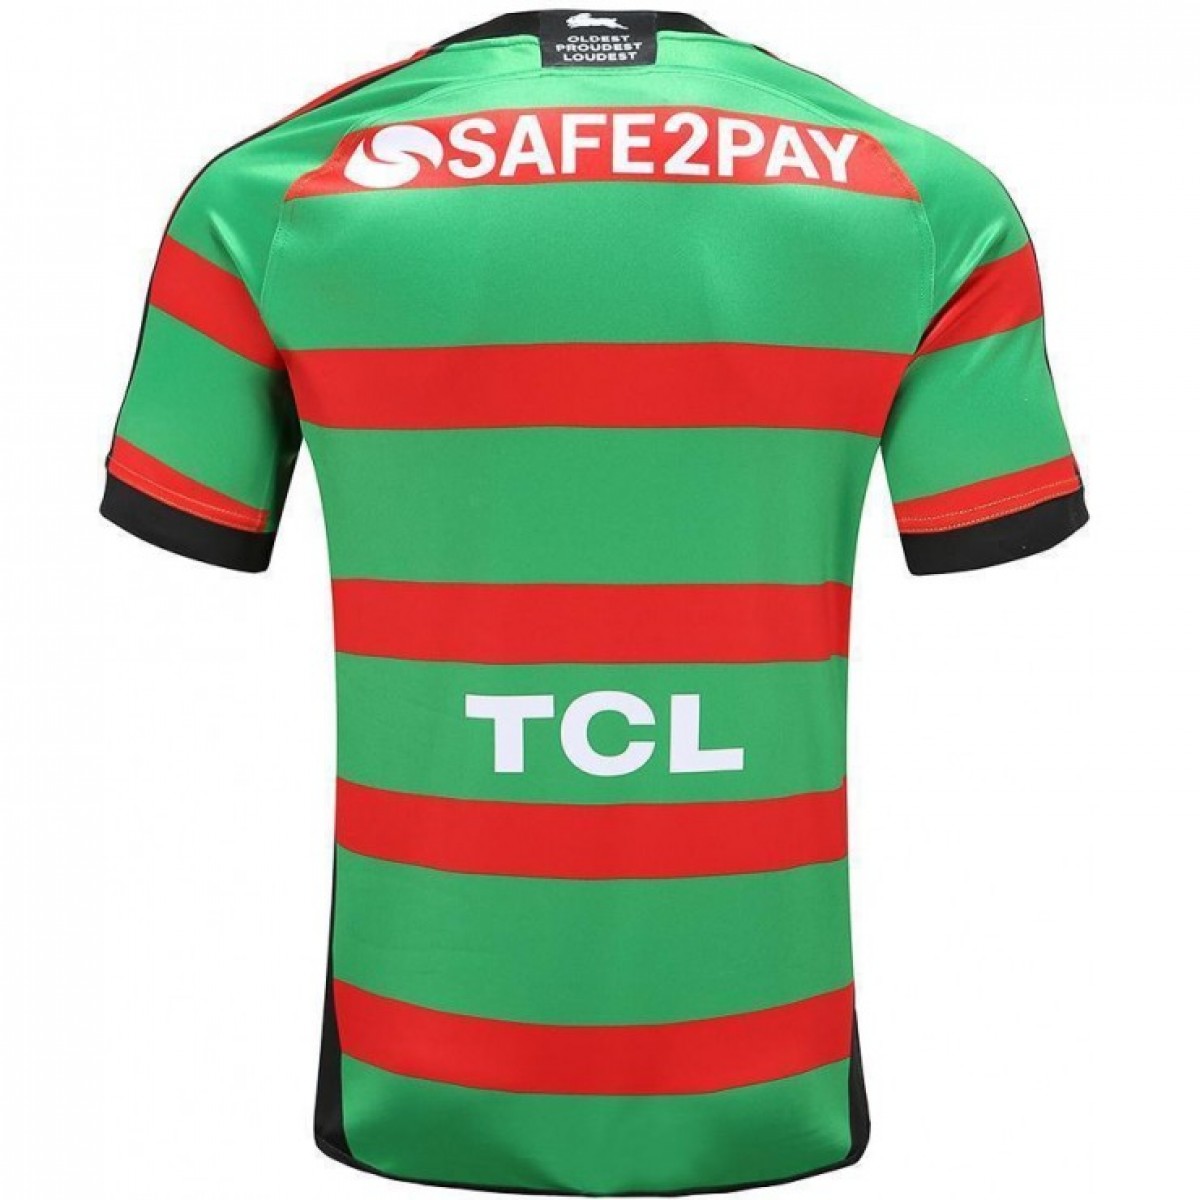 South Sydney Rabbitohs 2020 Home Jersey Sizes 2XL & 5XL Available NRL ISC 